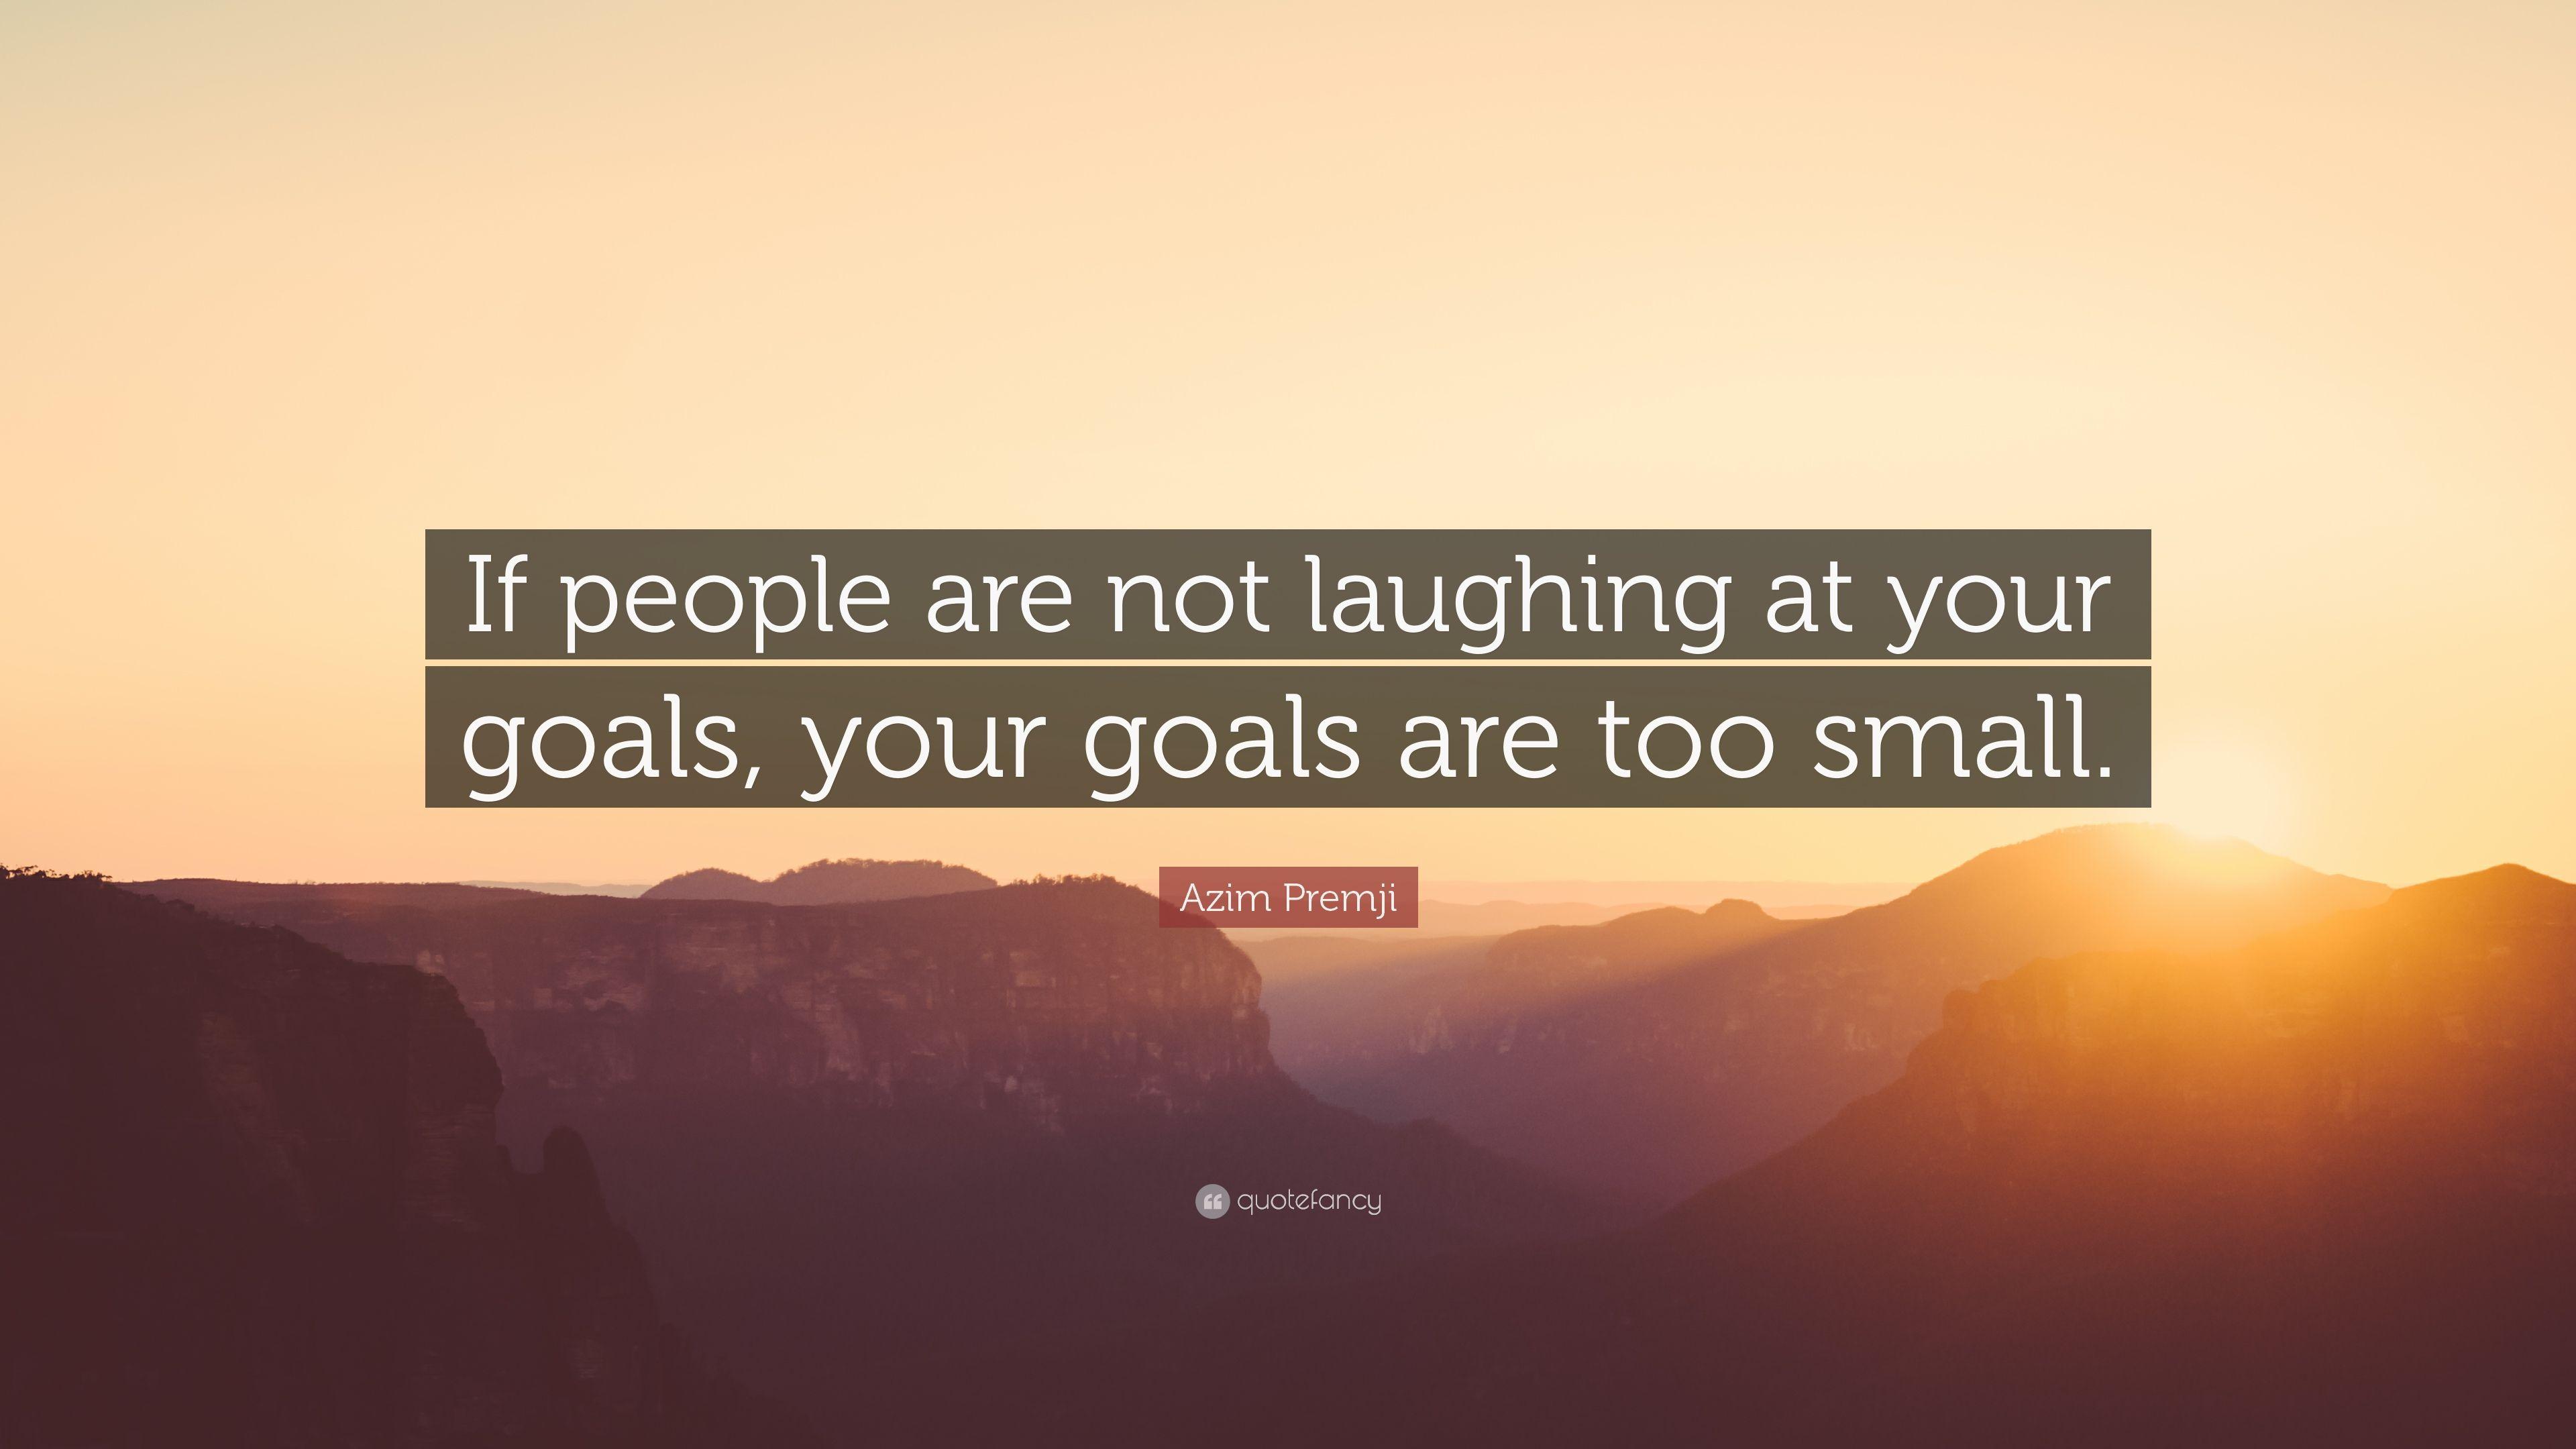 Azim Premji Quote: “If people are not laughing at your goals, your